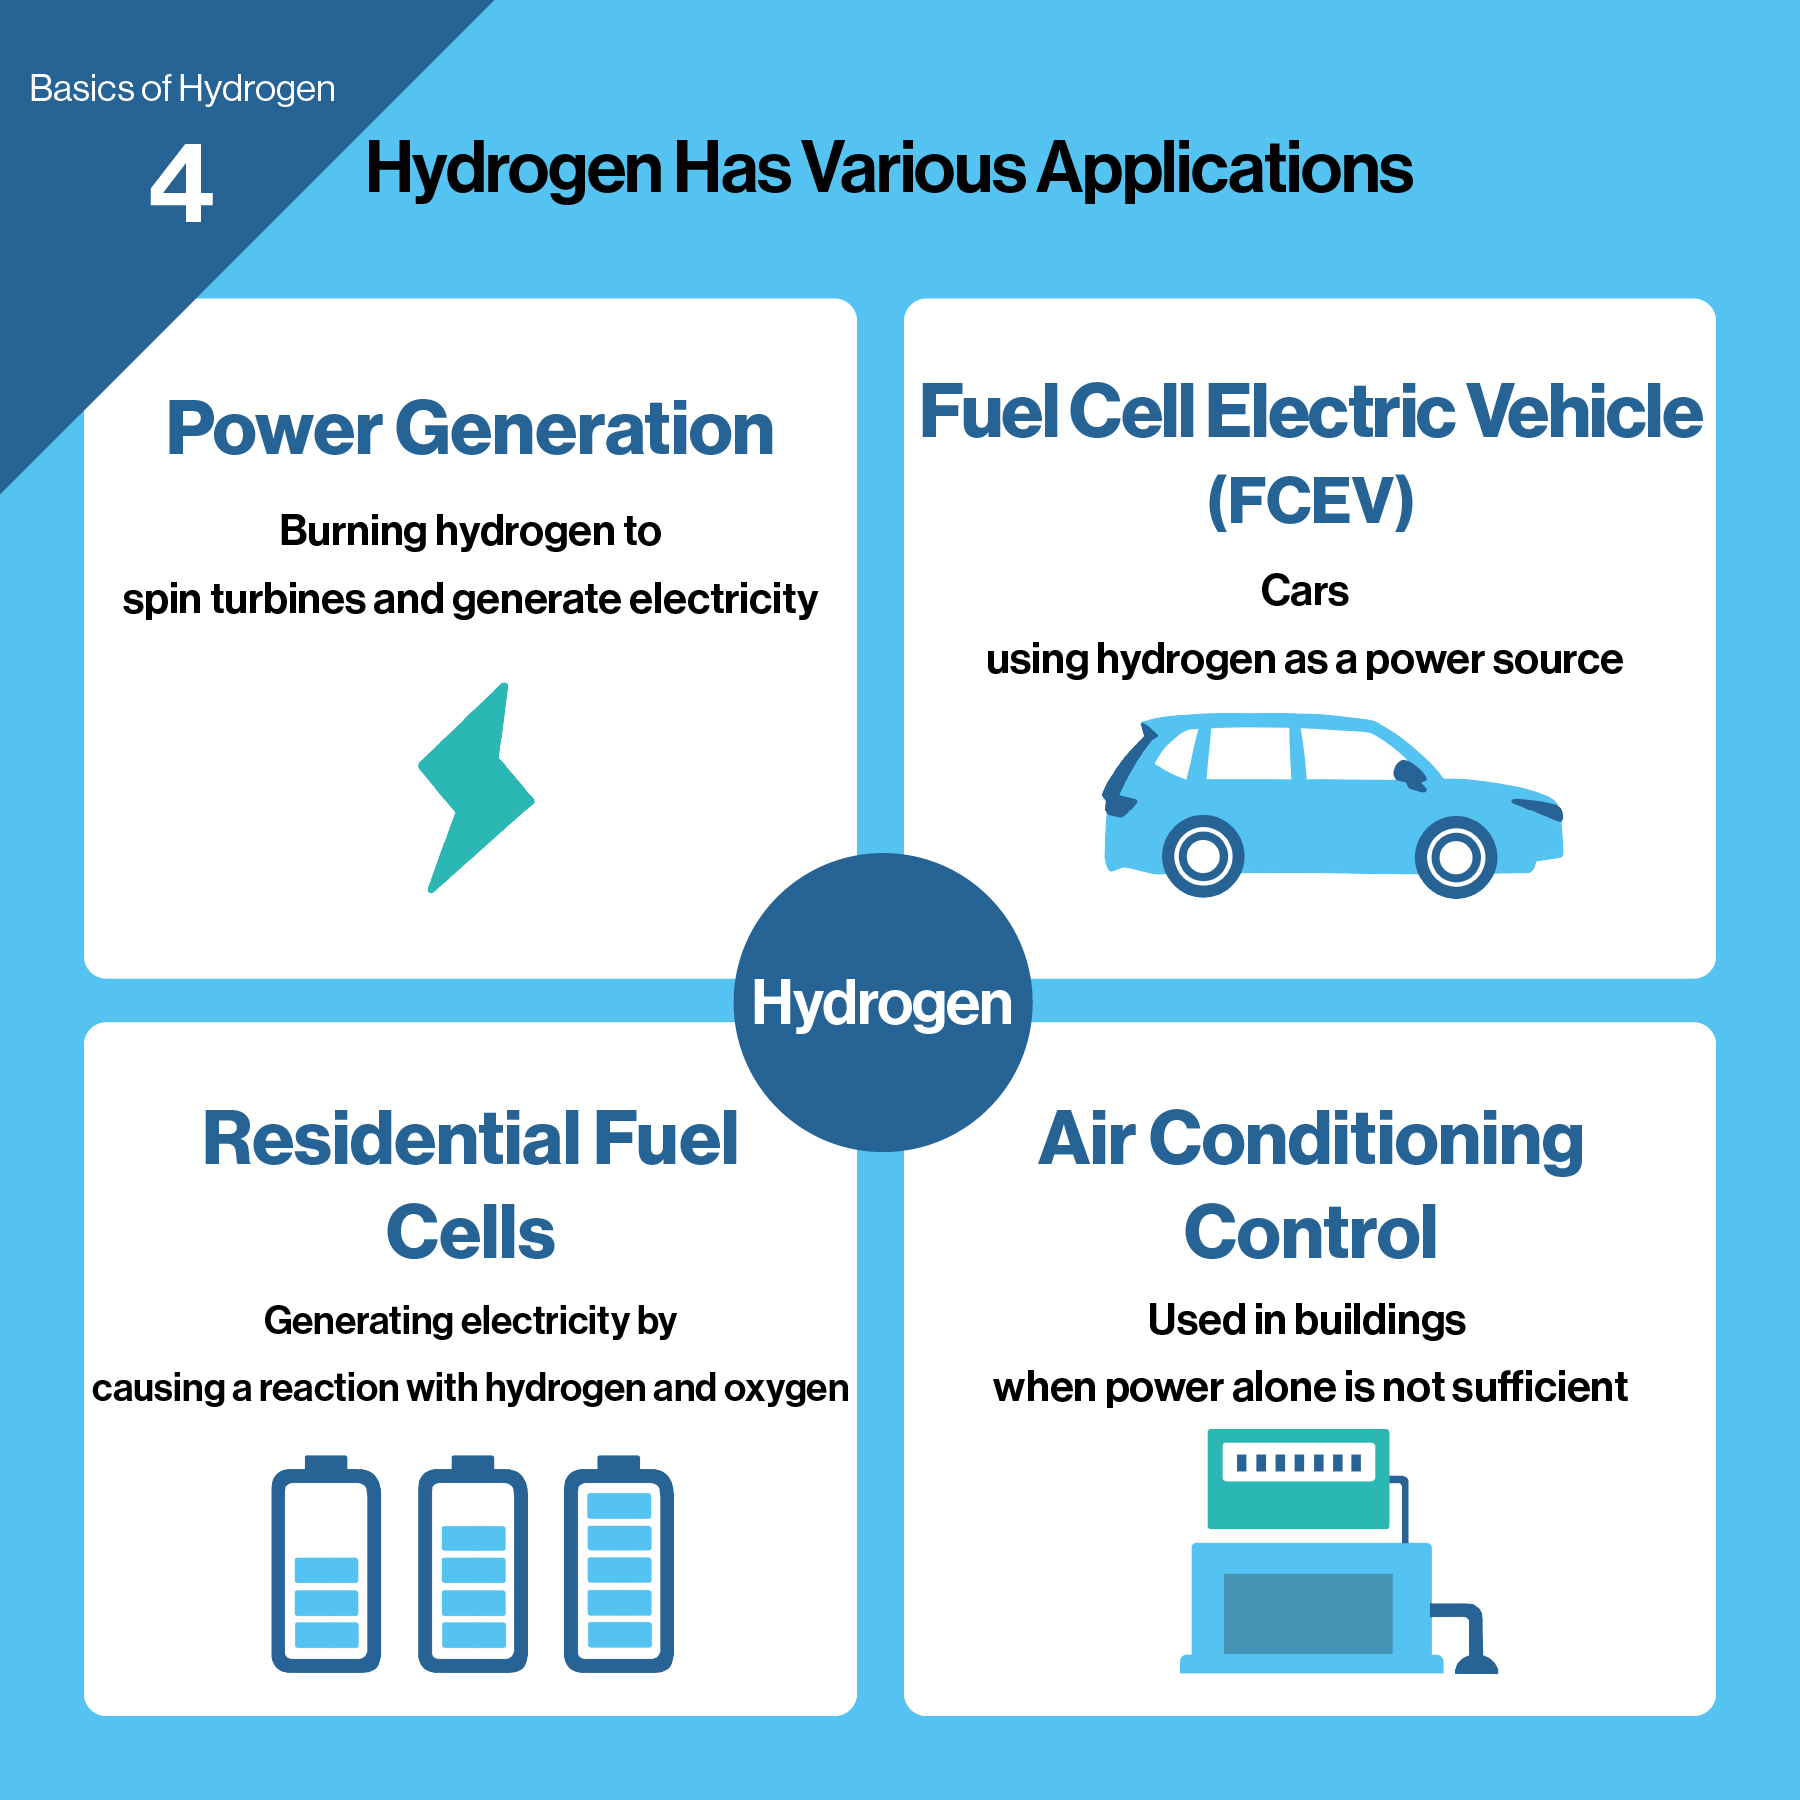 Basics of Hydrogen (4) Applications for hydrogen are various, including cars and air conditioning